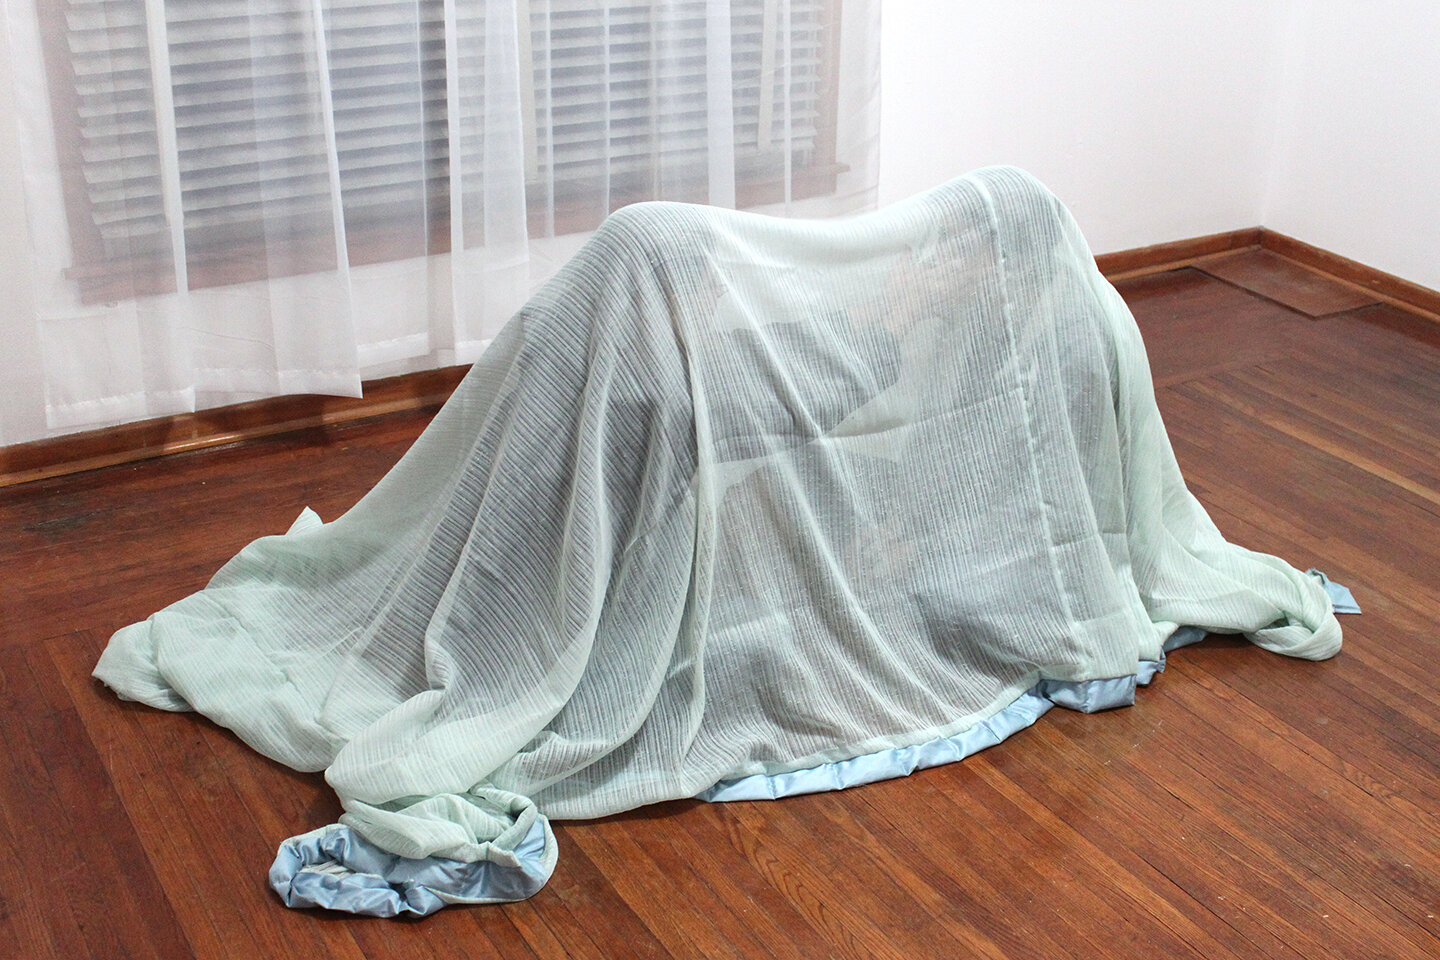  Cairus Larsen,  Vulnerability Blue  (fabric, rice) 2018/2019 *Pairs of people are invited to have a conversation under the blanket. 